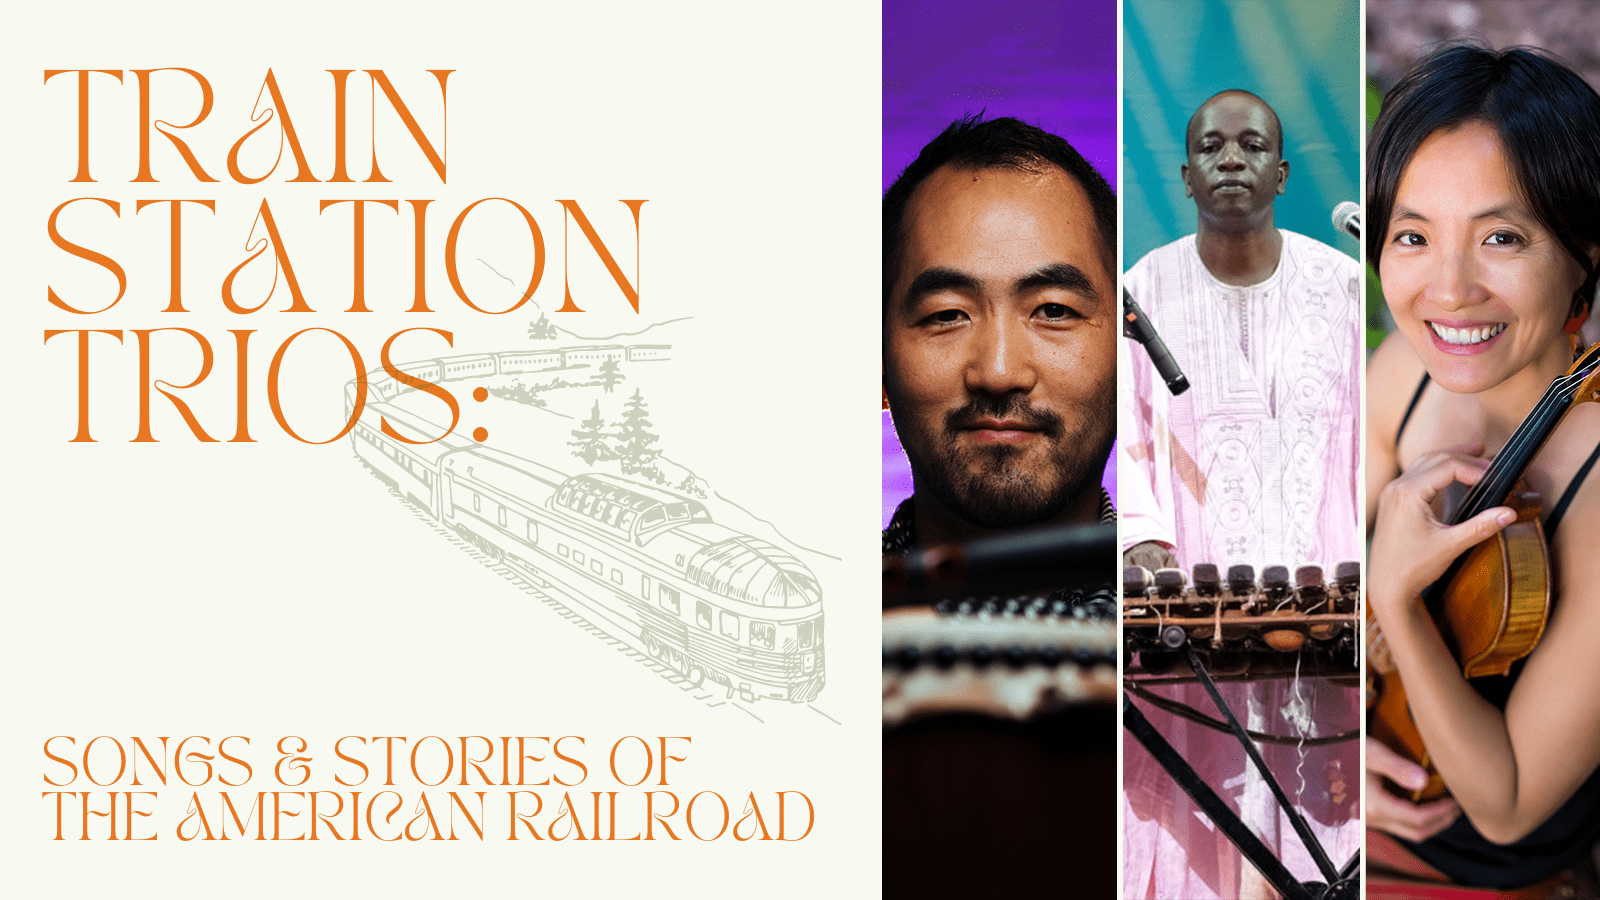 Photos of three musicians. Text that reads "train station trios: songs and stories of the american railroad" with gray drawing of a train on tracks